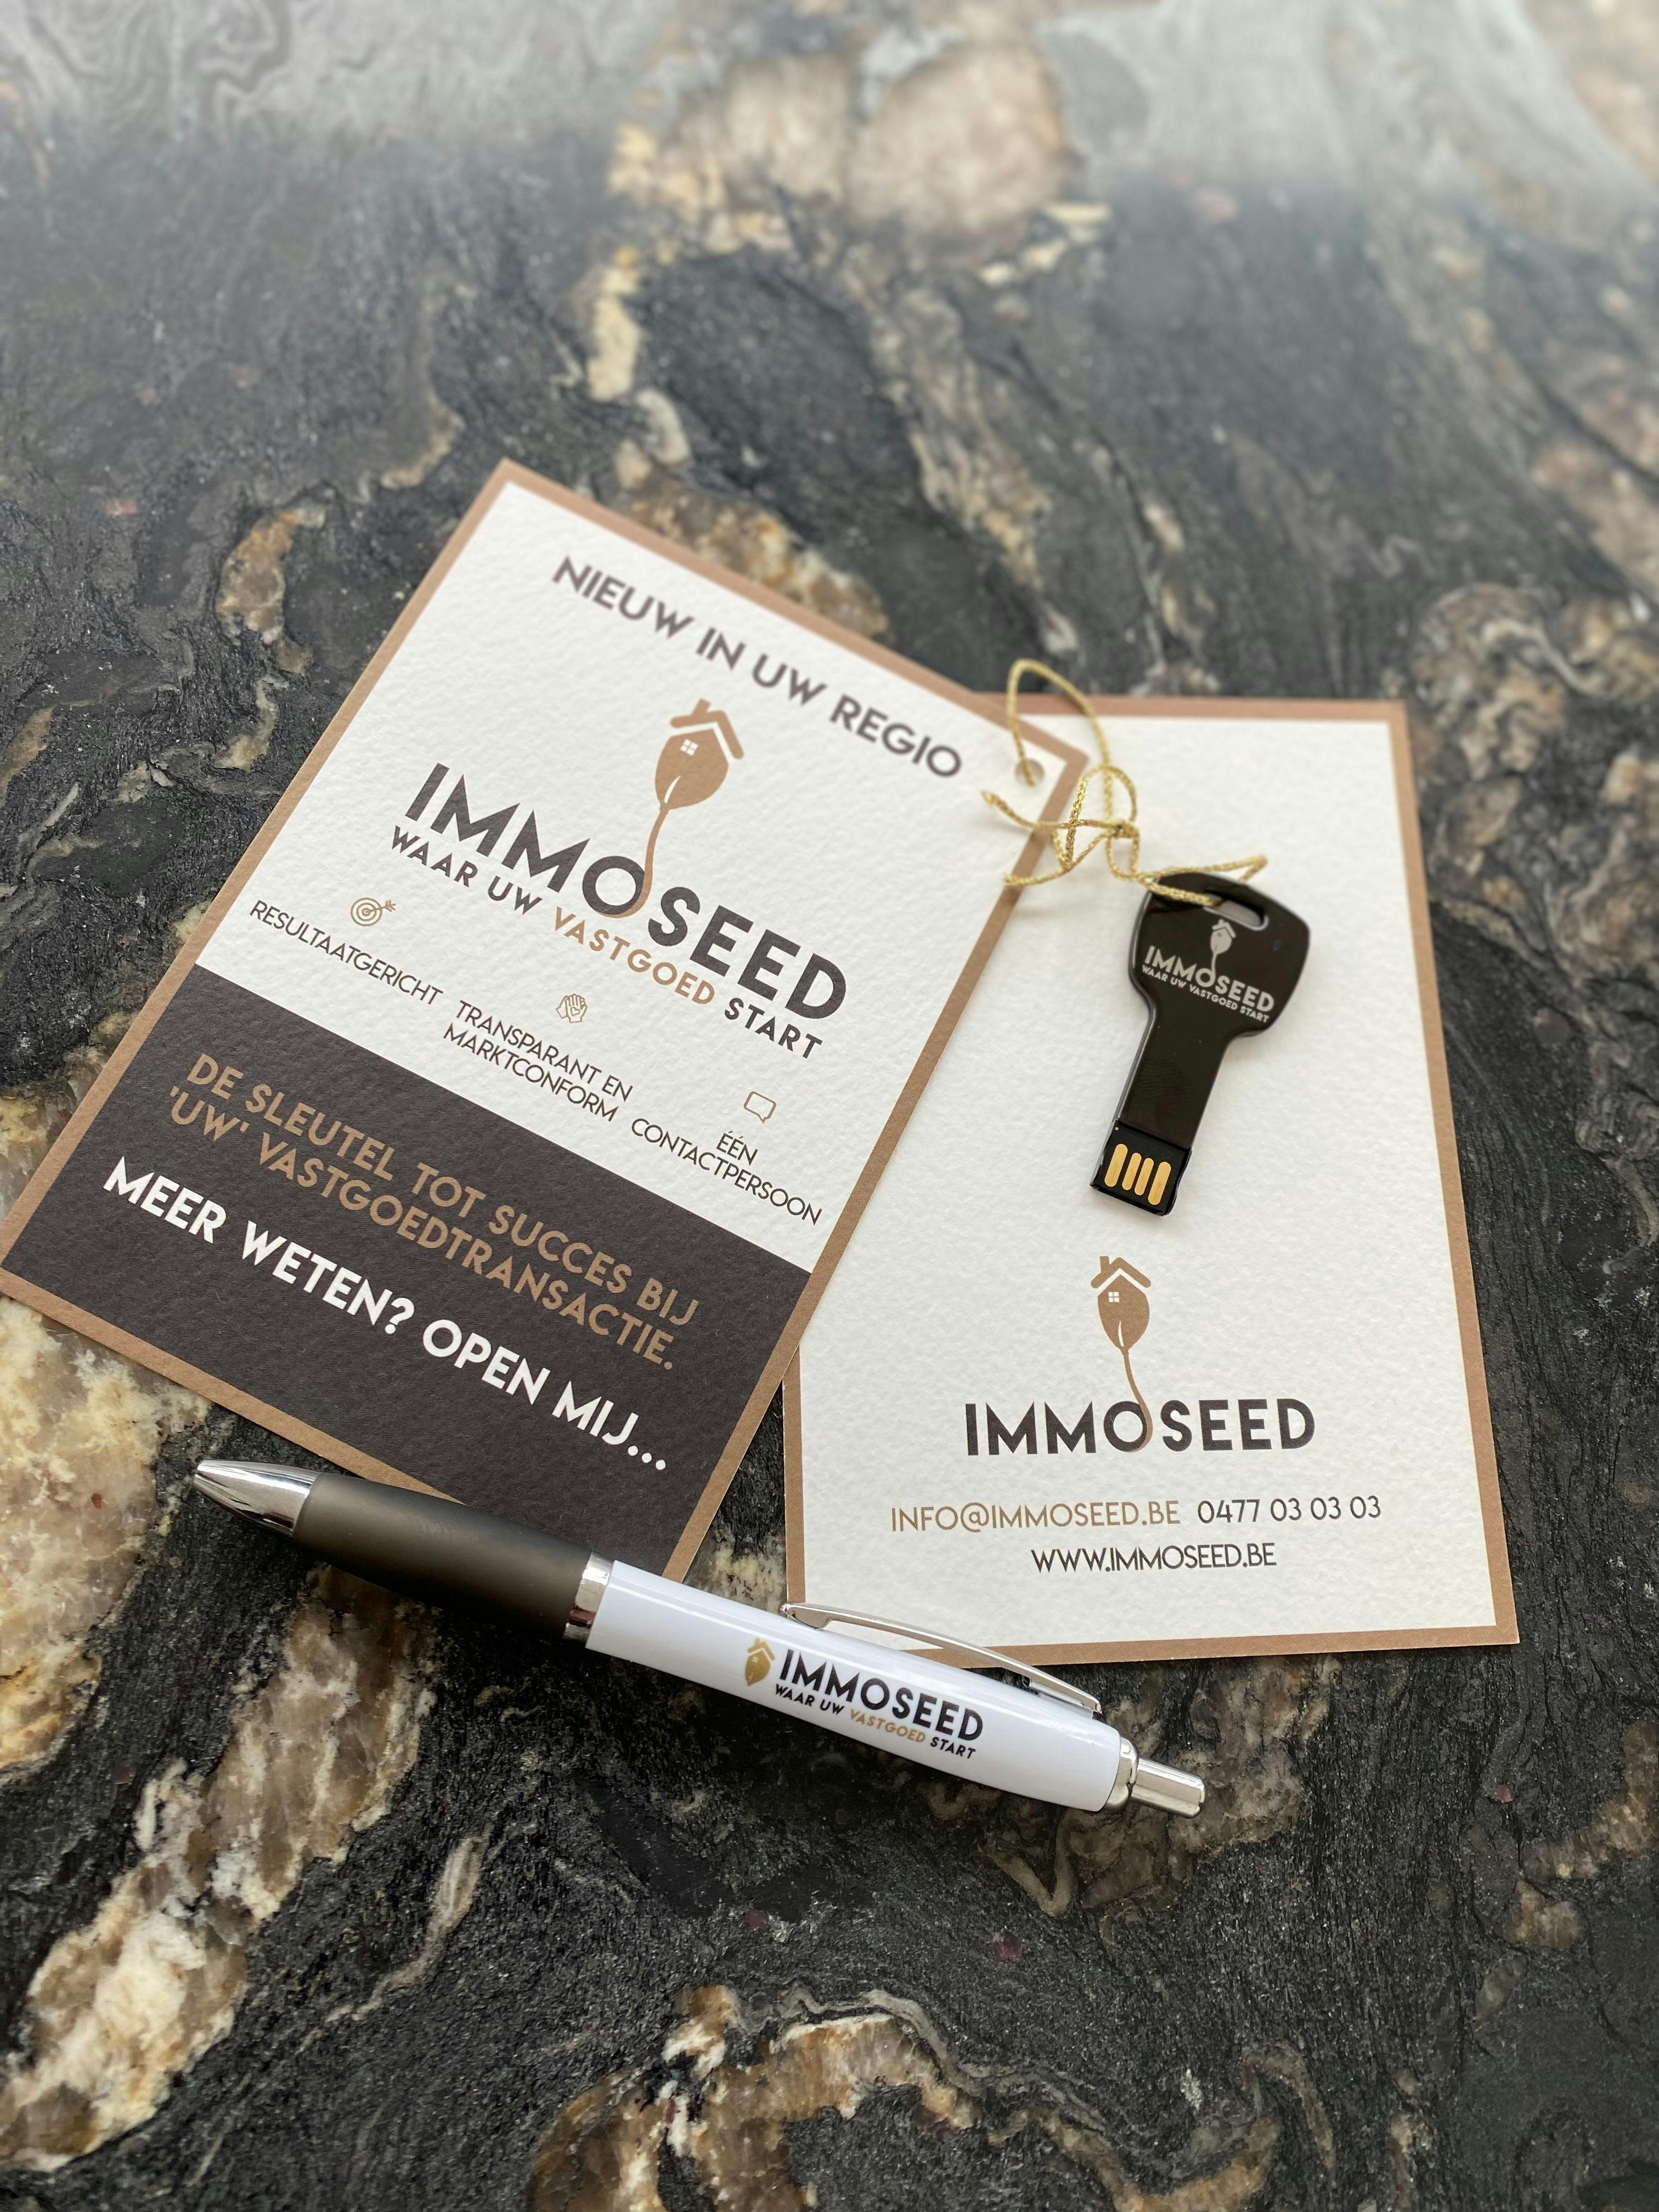 Immoseed gadgets